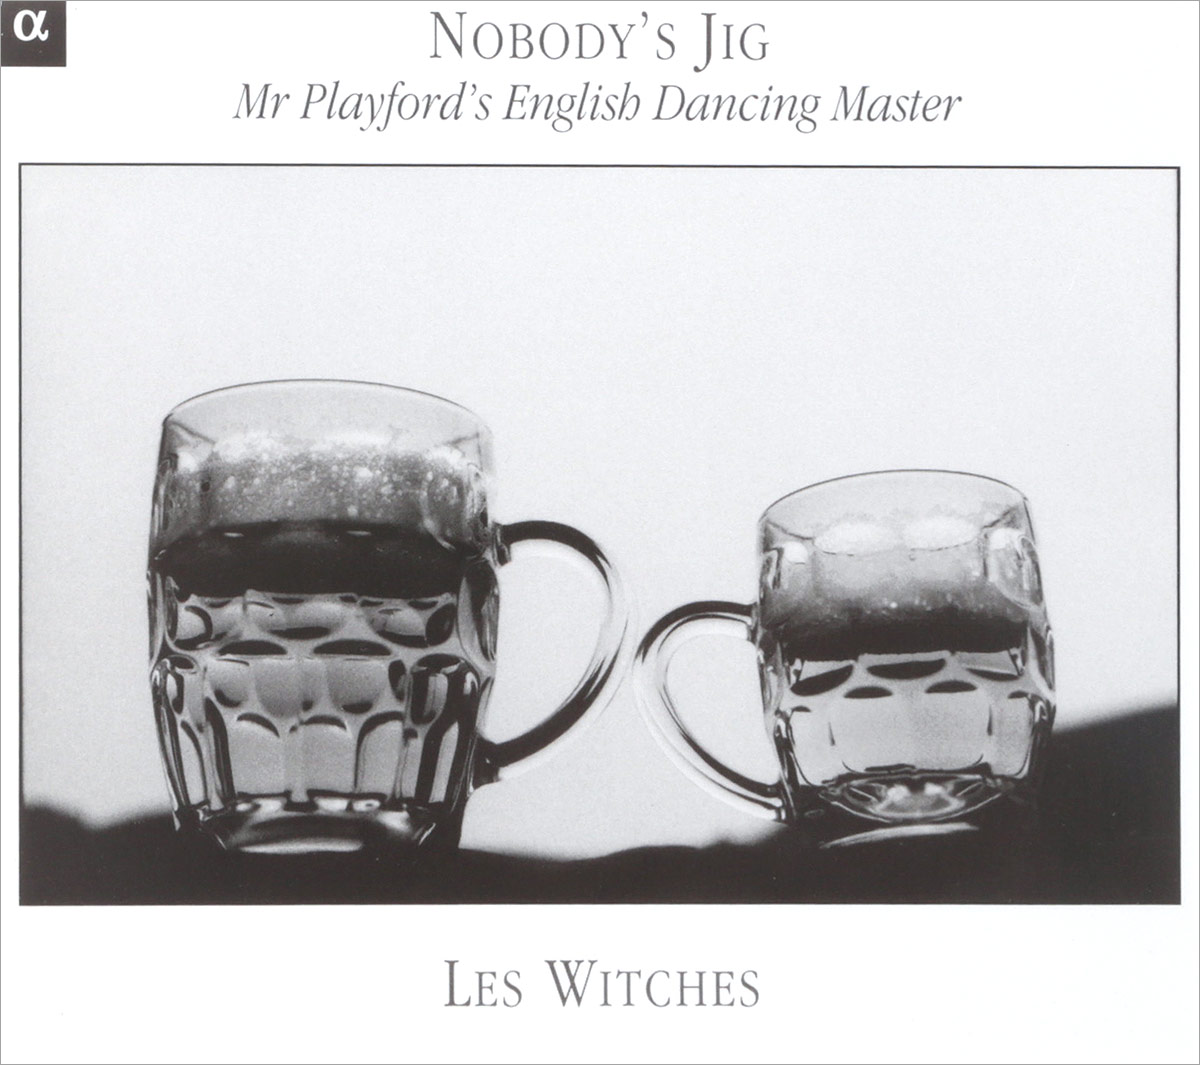 VARIOUS. NOBODY’S JIG, ‘MR PLAYFORD’S ENGLISH DANCING MASTER’, LES WITCHES. 1